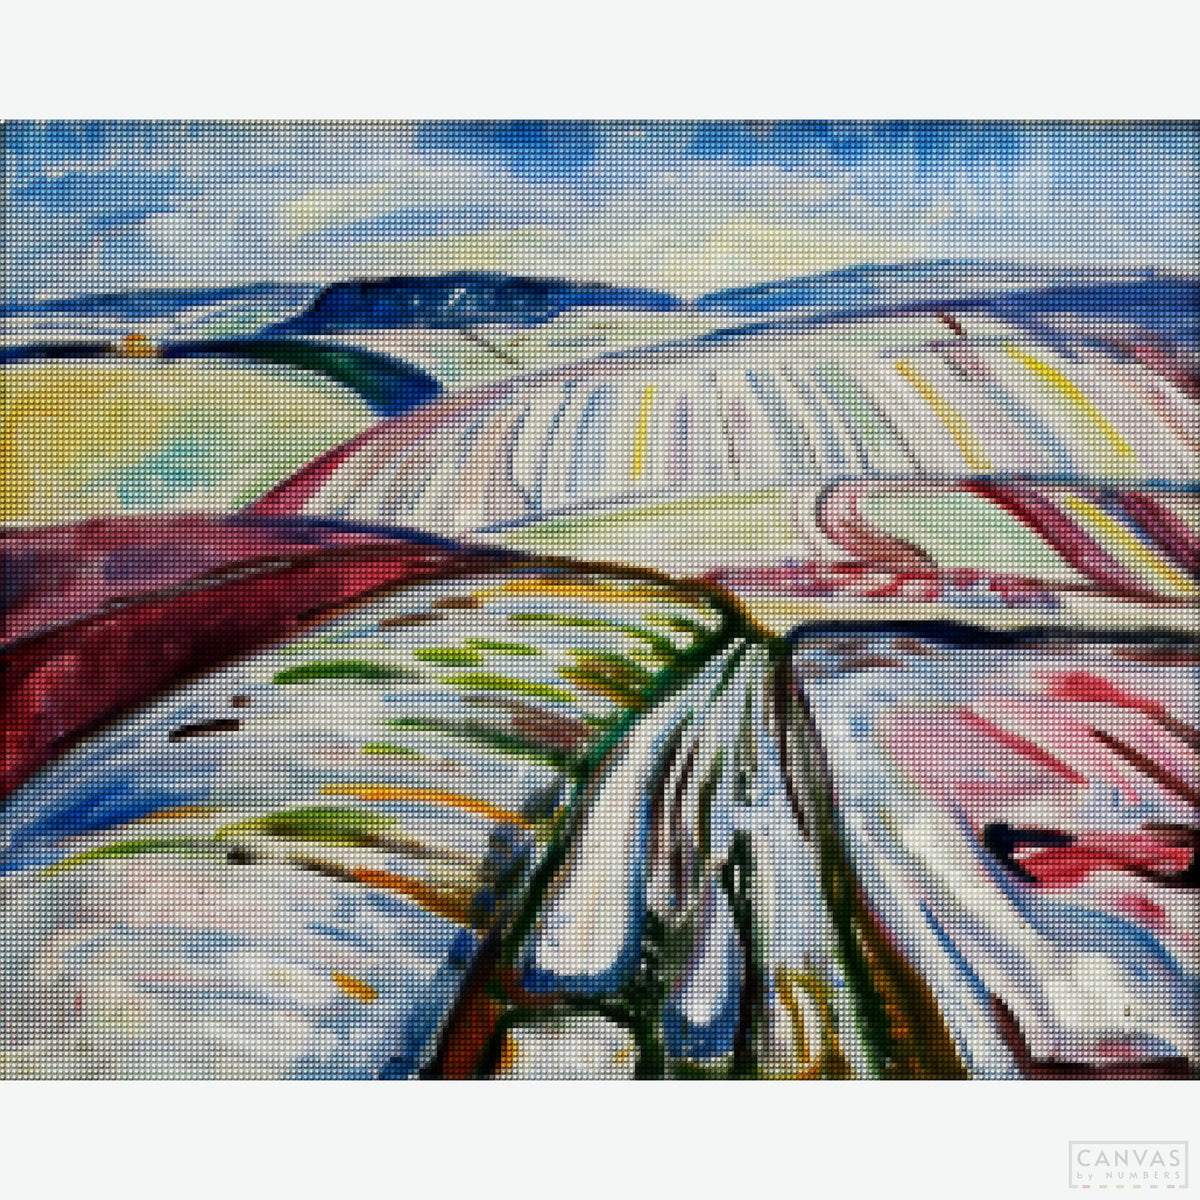 Winter Landscape, Elgersburg - Diamond Painting-Recreate Munch's tranquil winter scene with our detailed paint by numbers kit. Dive into the world of painting while appreciating classic artistry.-Canvas by Numbers